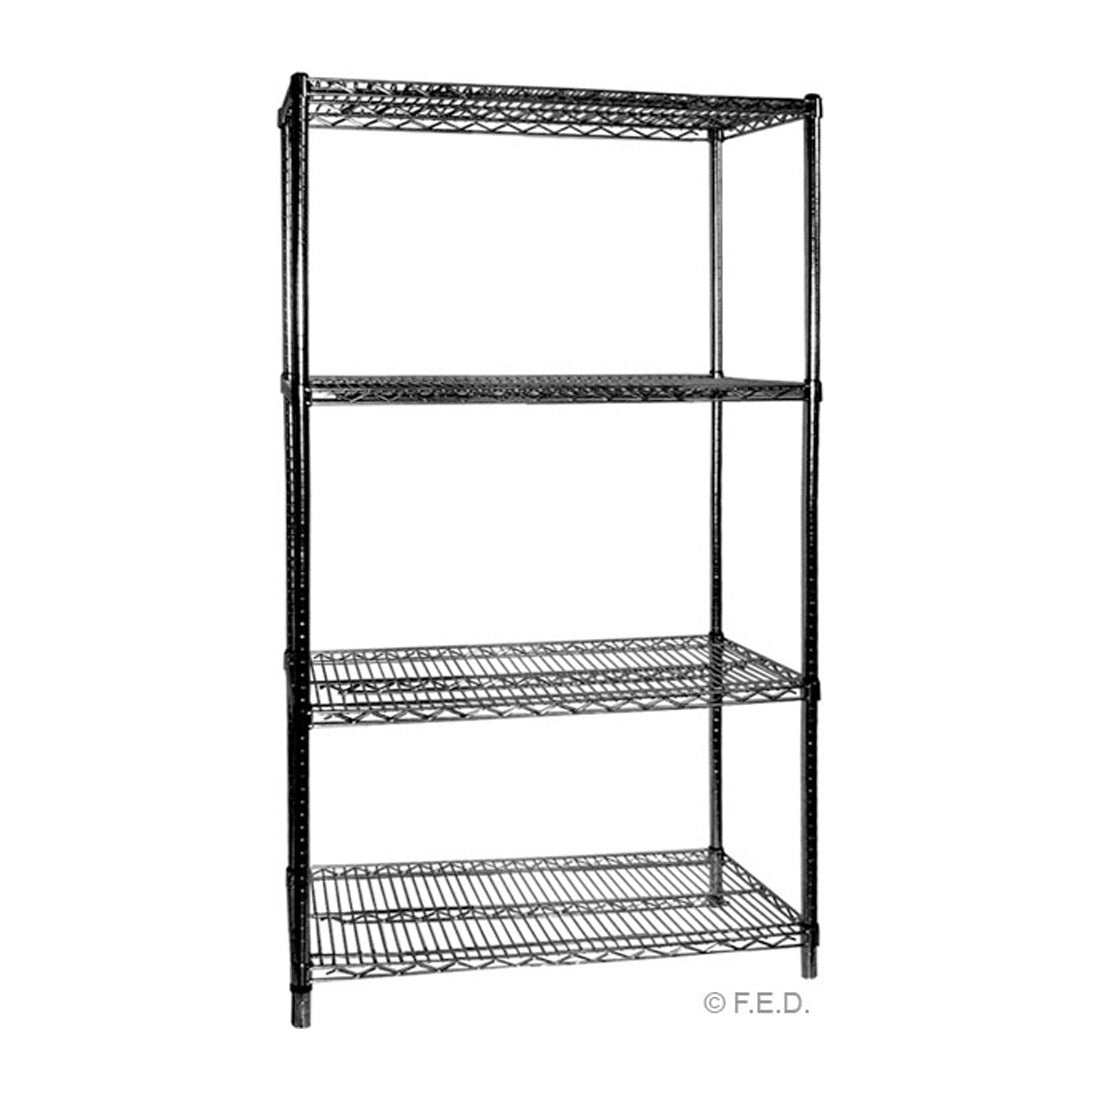 B24/36 Four Tier Shelving - Durable Commercial Storage Solution